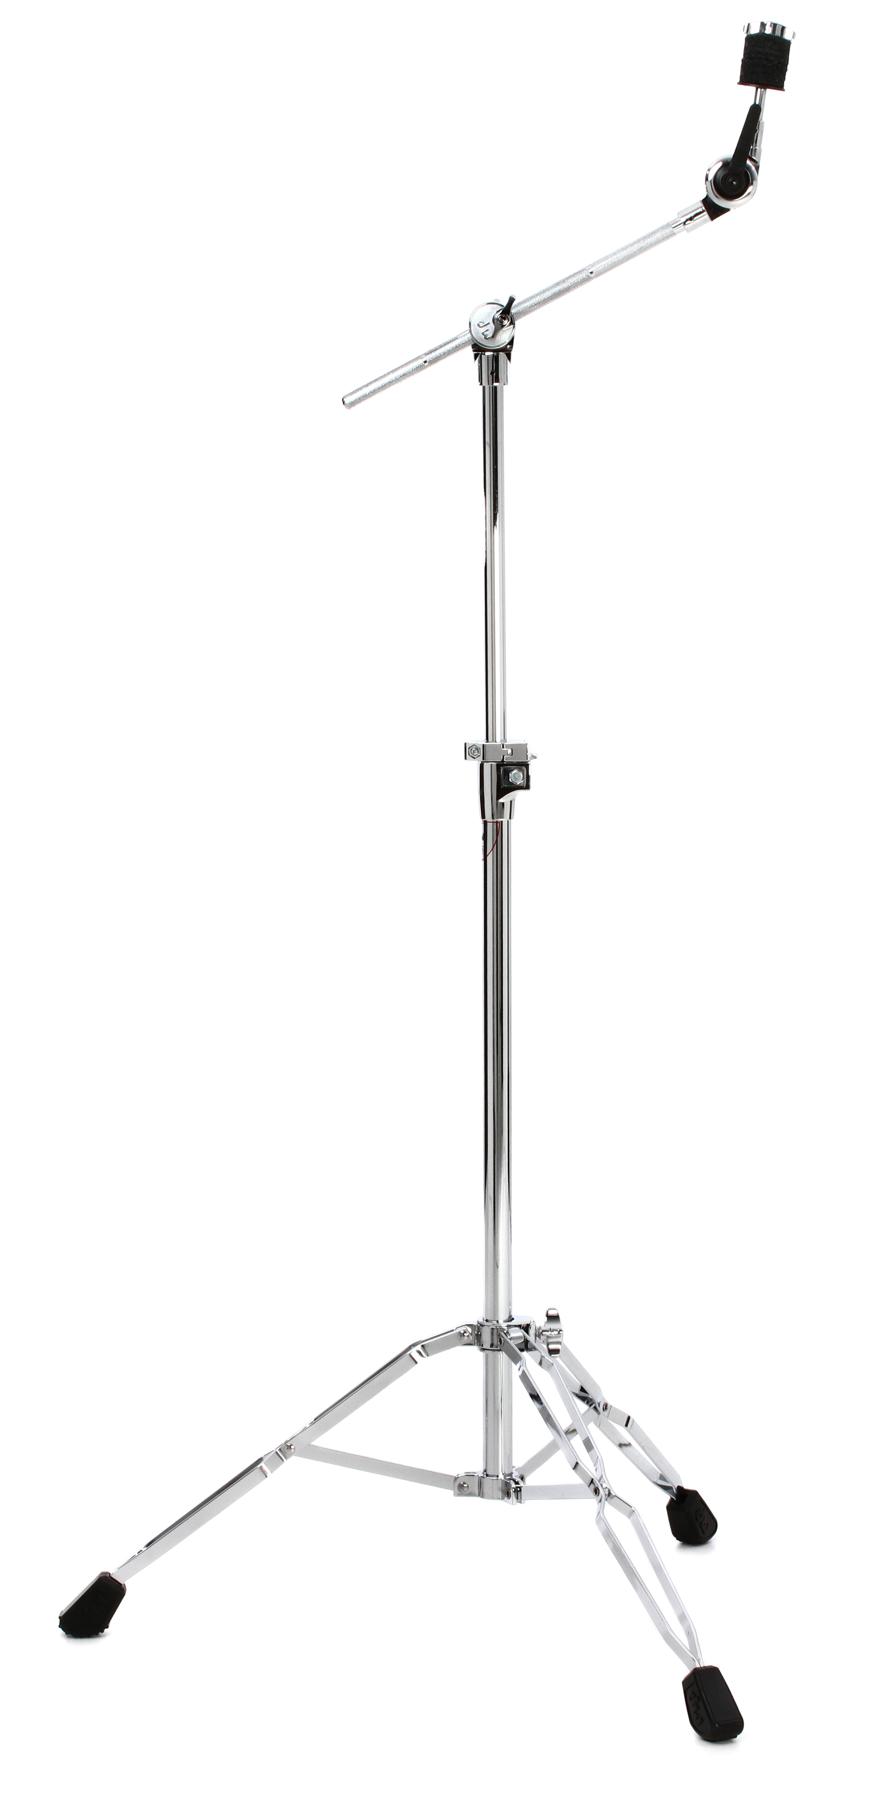 4. DW DWCP3700 Cymbal Stand